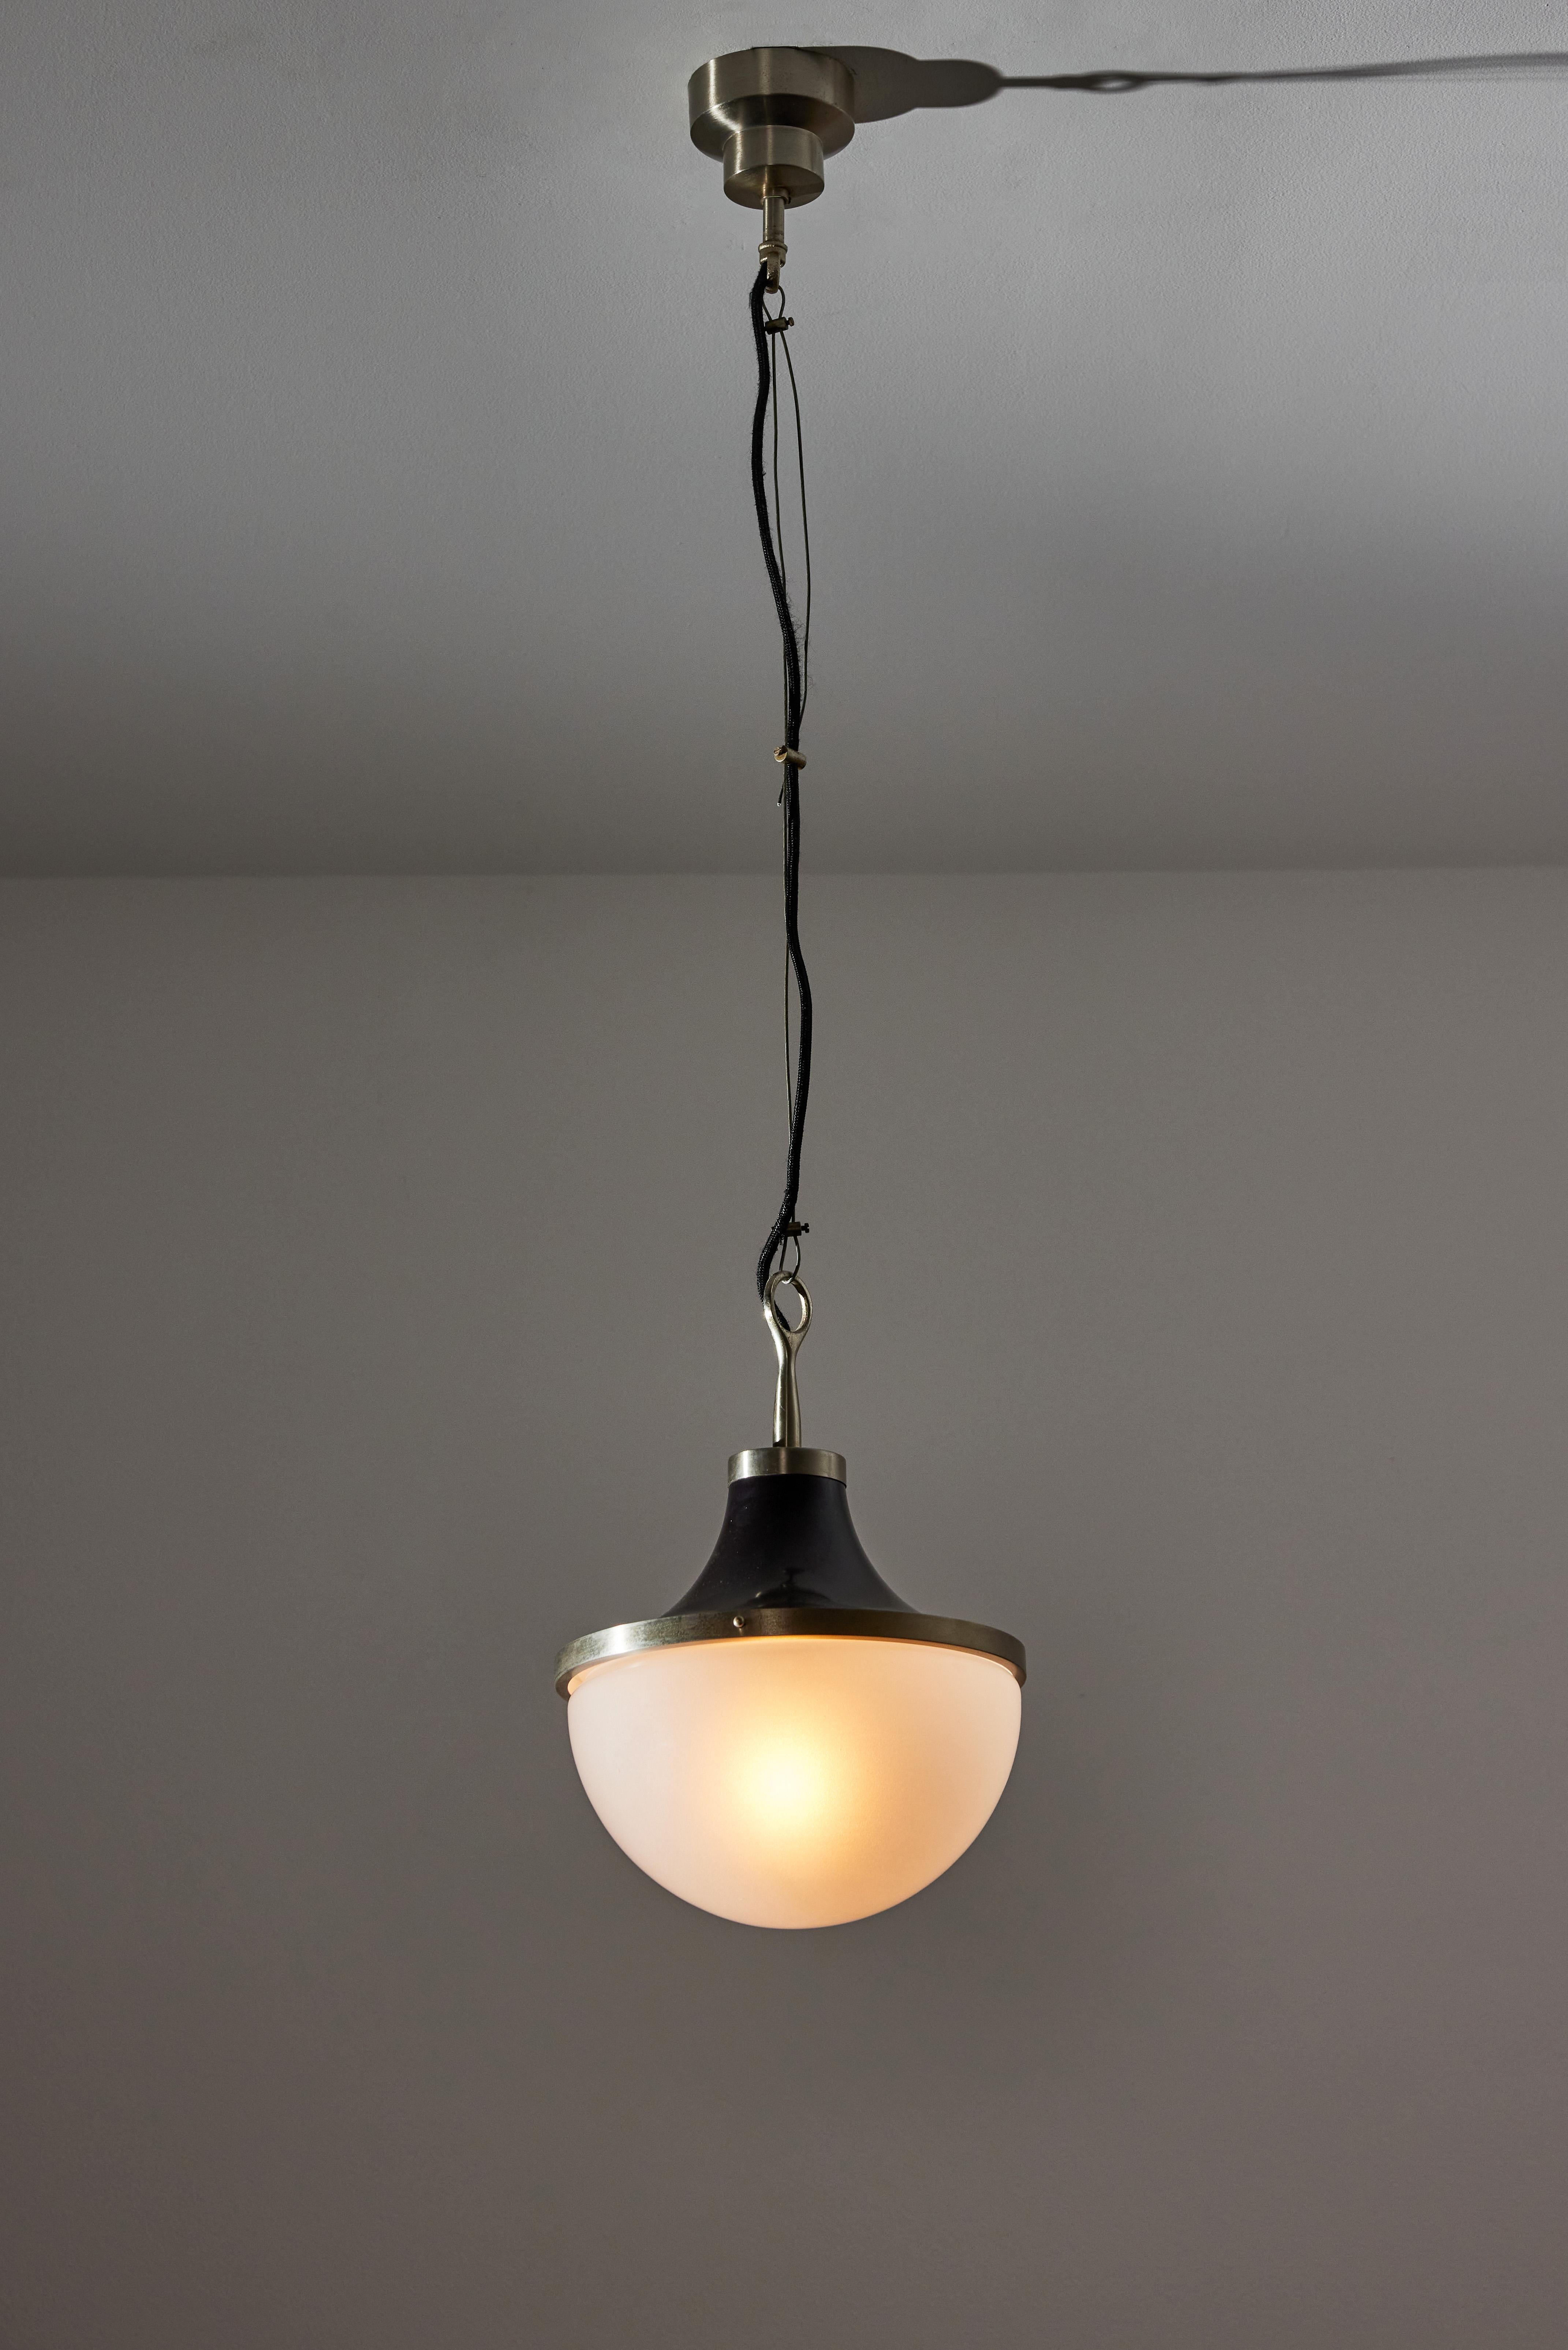 Picaro suspension light by Sergio Mazza for Artemide. Designed and manufactured in Italy, circa 1960s. Glass, brushed nickel, painted metal, brass. Custom brushed nickel-plated ceiling plate. Wired for U.S. standards. We recommend one E27 75w